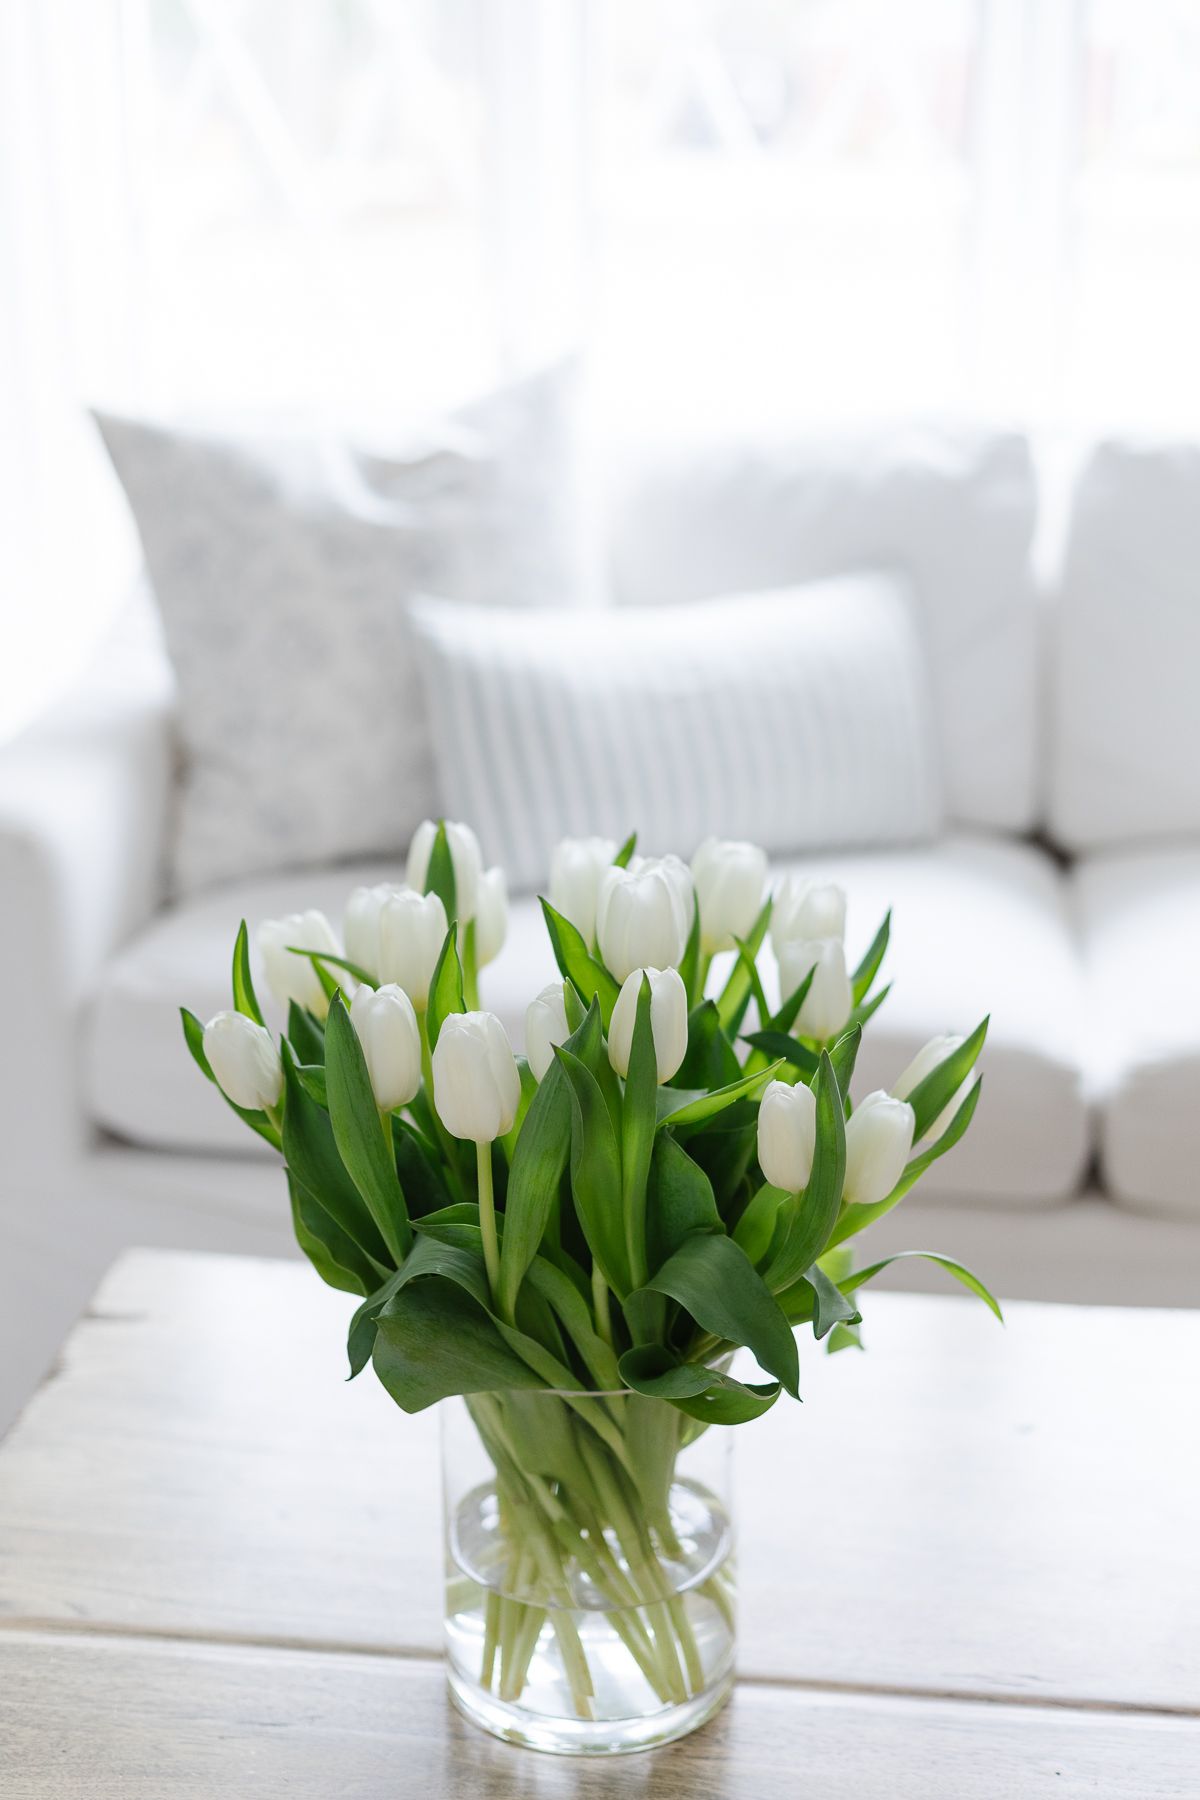 A vase of white tulips on a wooden coffee table.